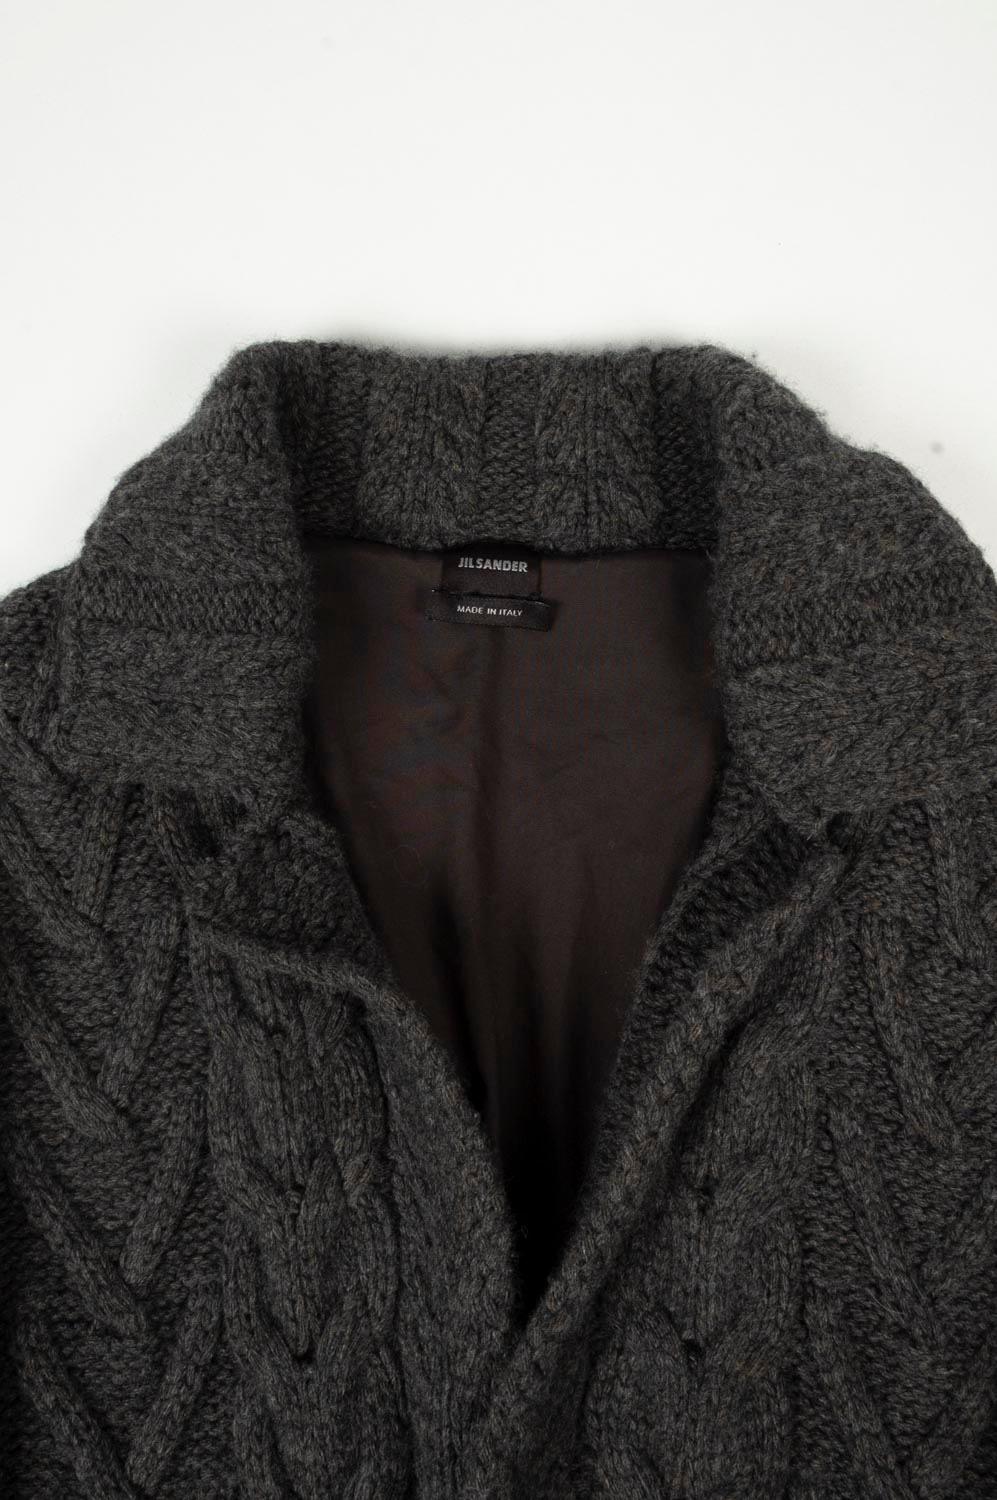 100% genuine Jil Sander Cardigan Men Sweater, S549-1
Color: Grey
(An actual color may a bit vary due to individual computer screen interpretation)
Material: 70% merino wool, 30% cashmere
Tag size: ITA 54 (Large)
This sweater is great quality item.